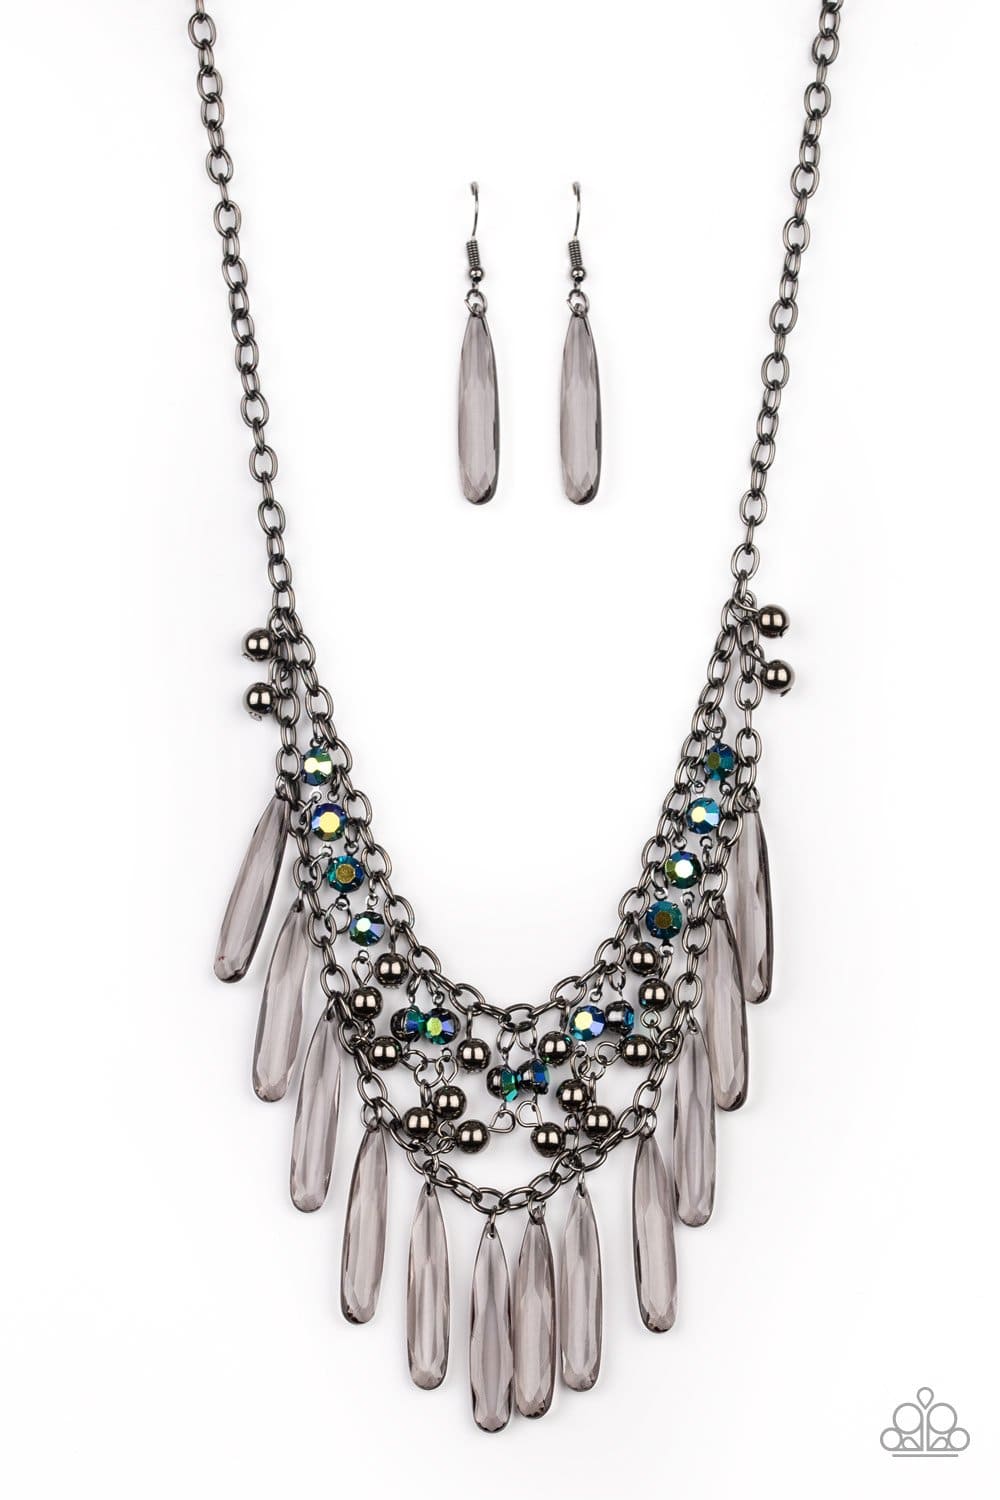 Uptown Urban - Gunmetal Iridescent May 2020 Life of the Party Necklace - Paparazzi - GlaMarous Titi Jewels